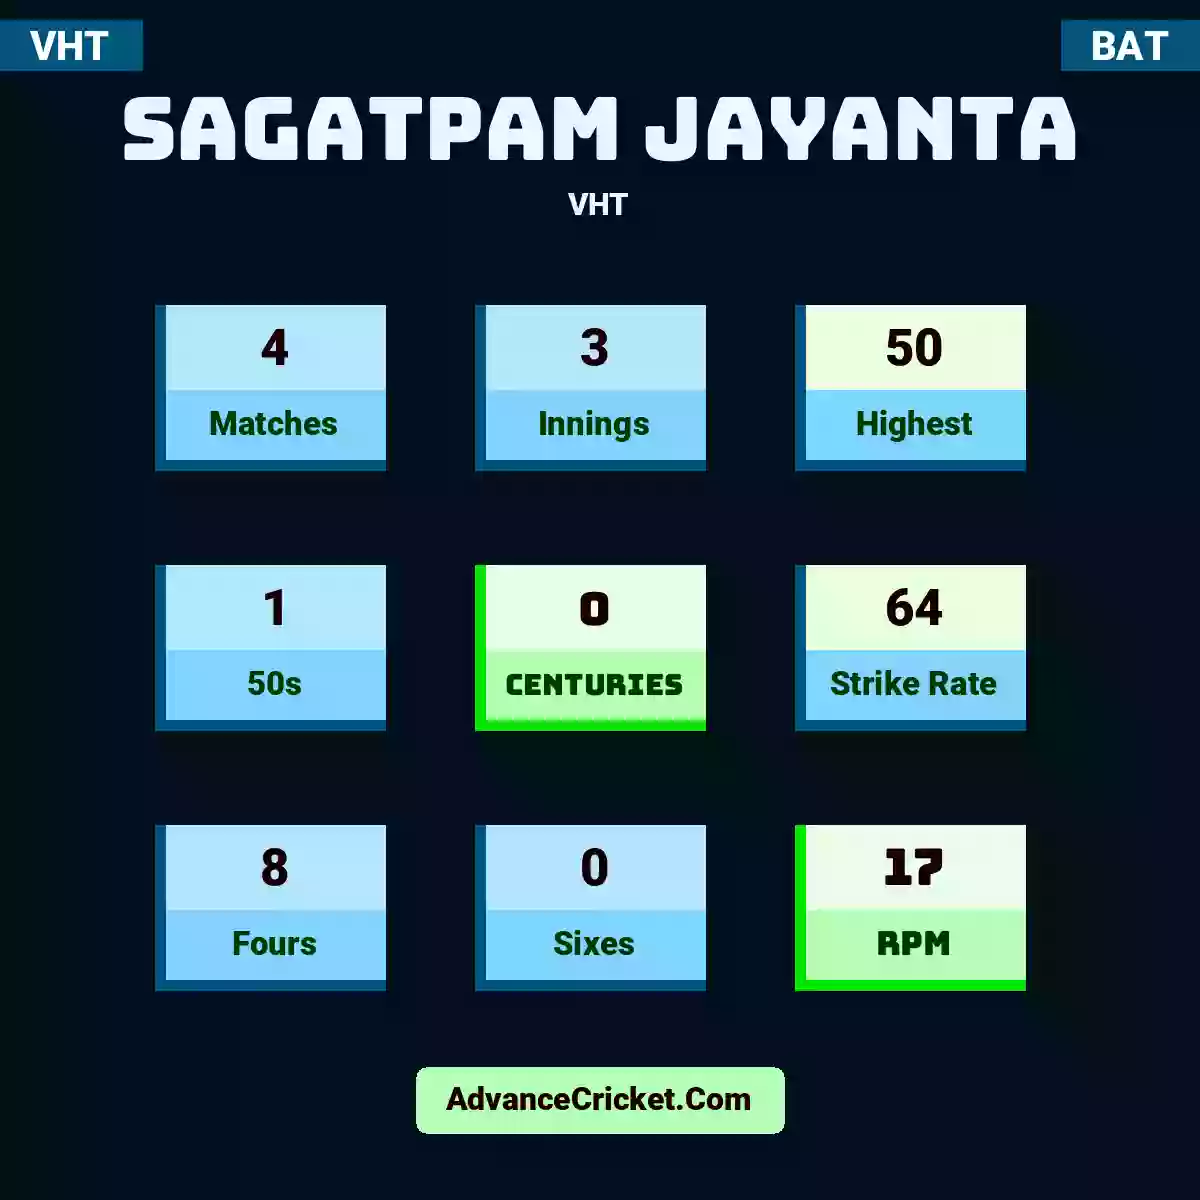 Sagatpam Jayanta VHT , Sagatpam Jayanta played 4 matches, scored 50 runs as highest, 1 half-centuries, and 0 centuries, with a strike rate of 64. S.Jayanta hit 8 fours and 0 sixes, with an RPM of 17.